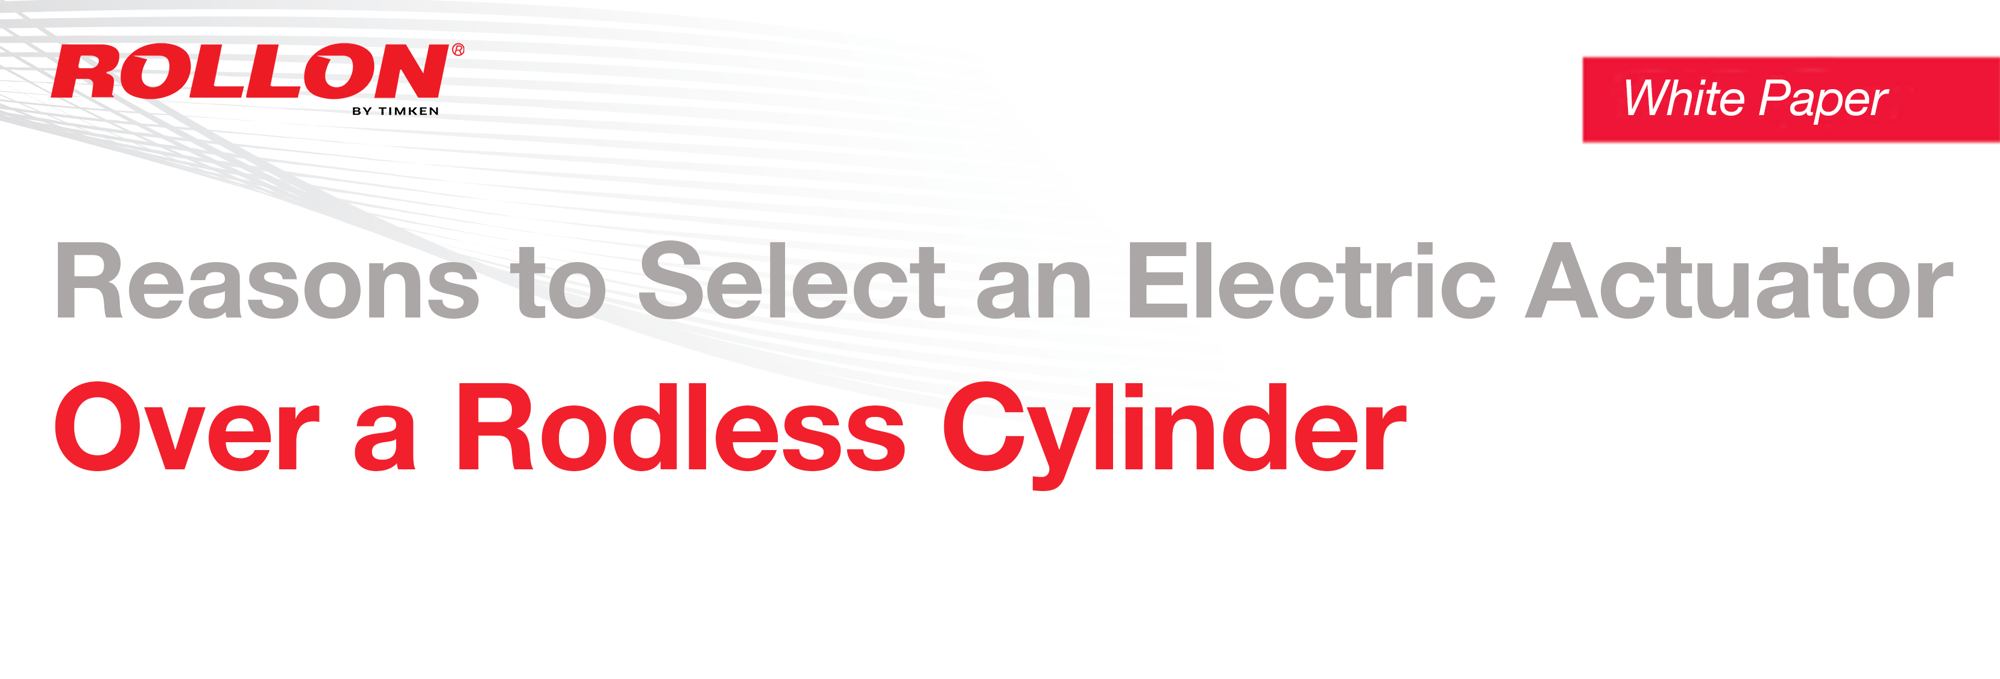 Reasons to Select an Electric Actuator Over a Rodless Cylinder